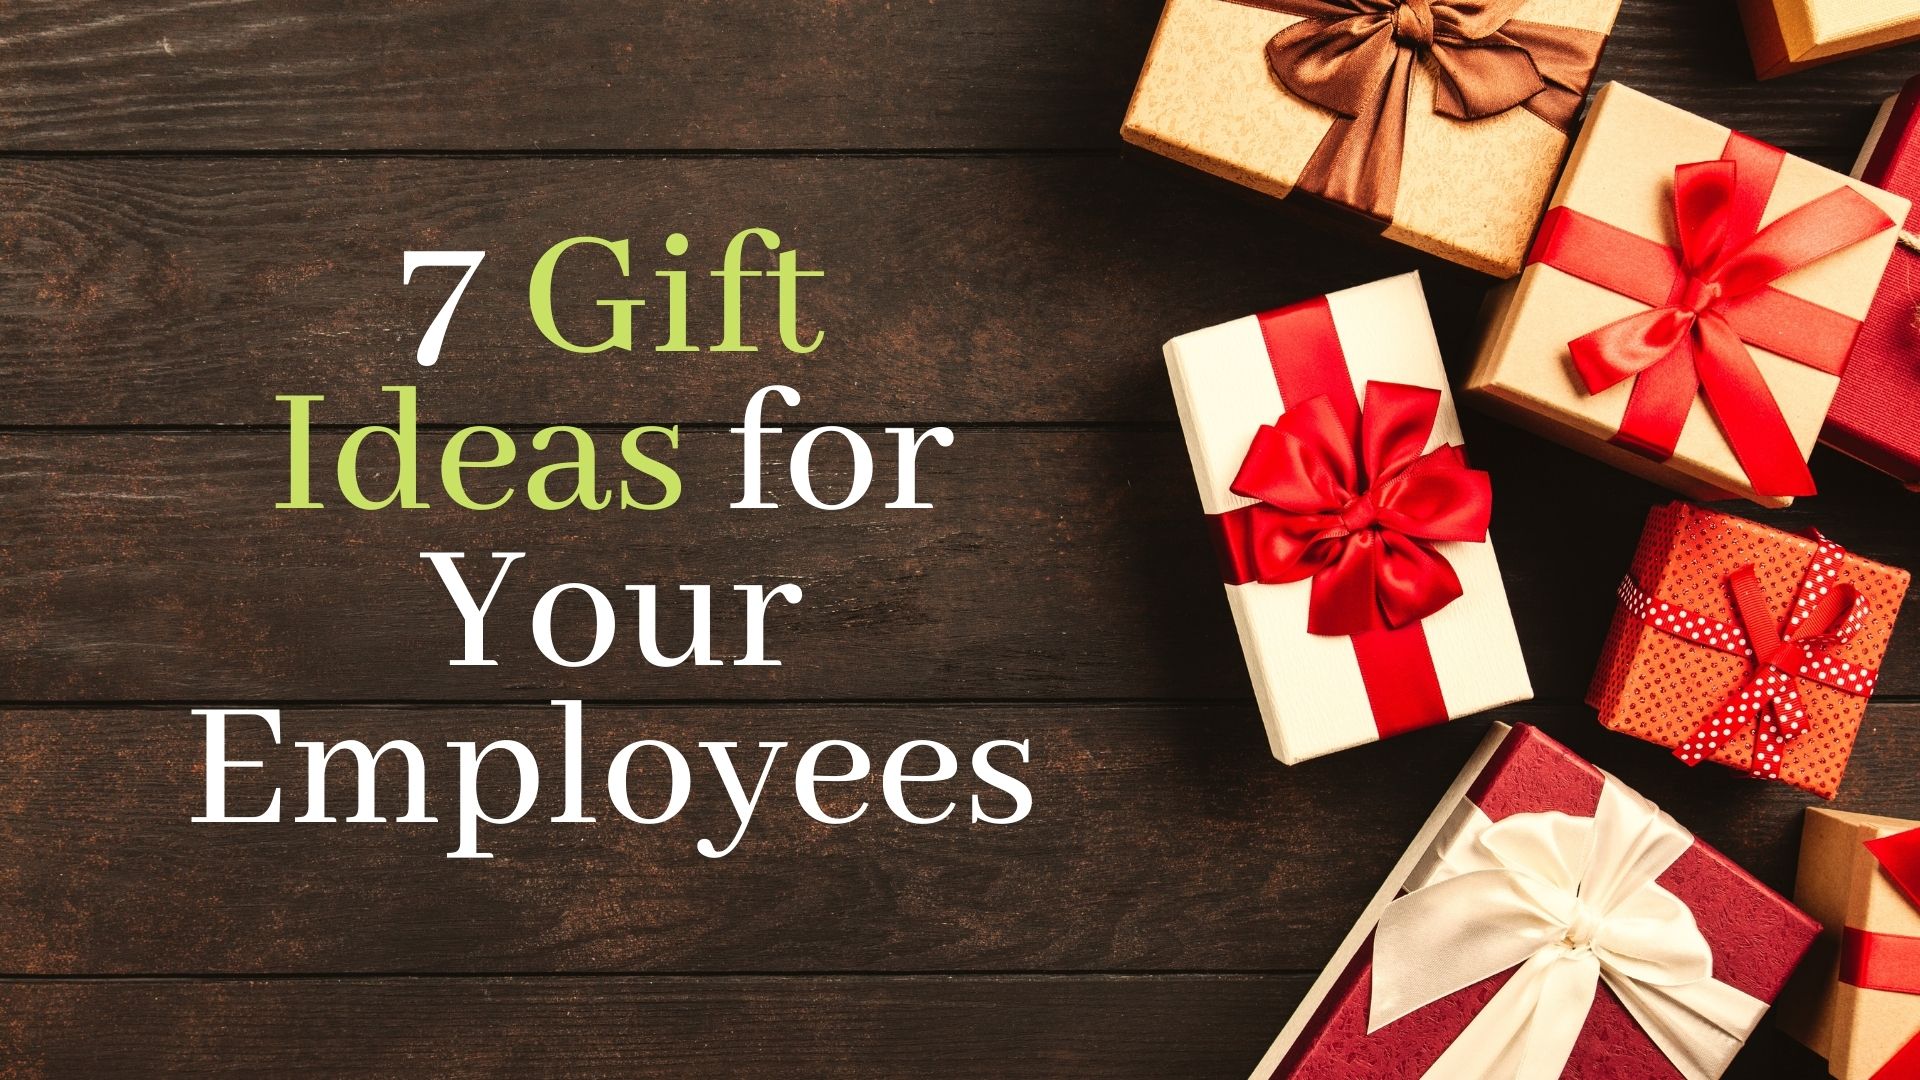 7 Gift Ideas for Your Employees